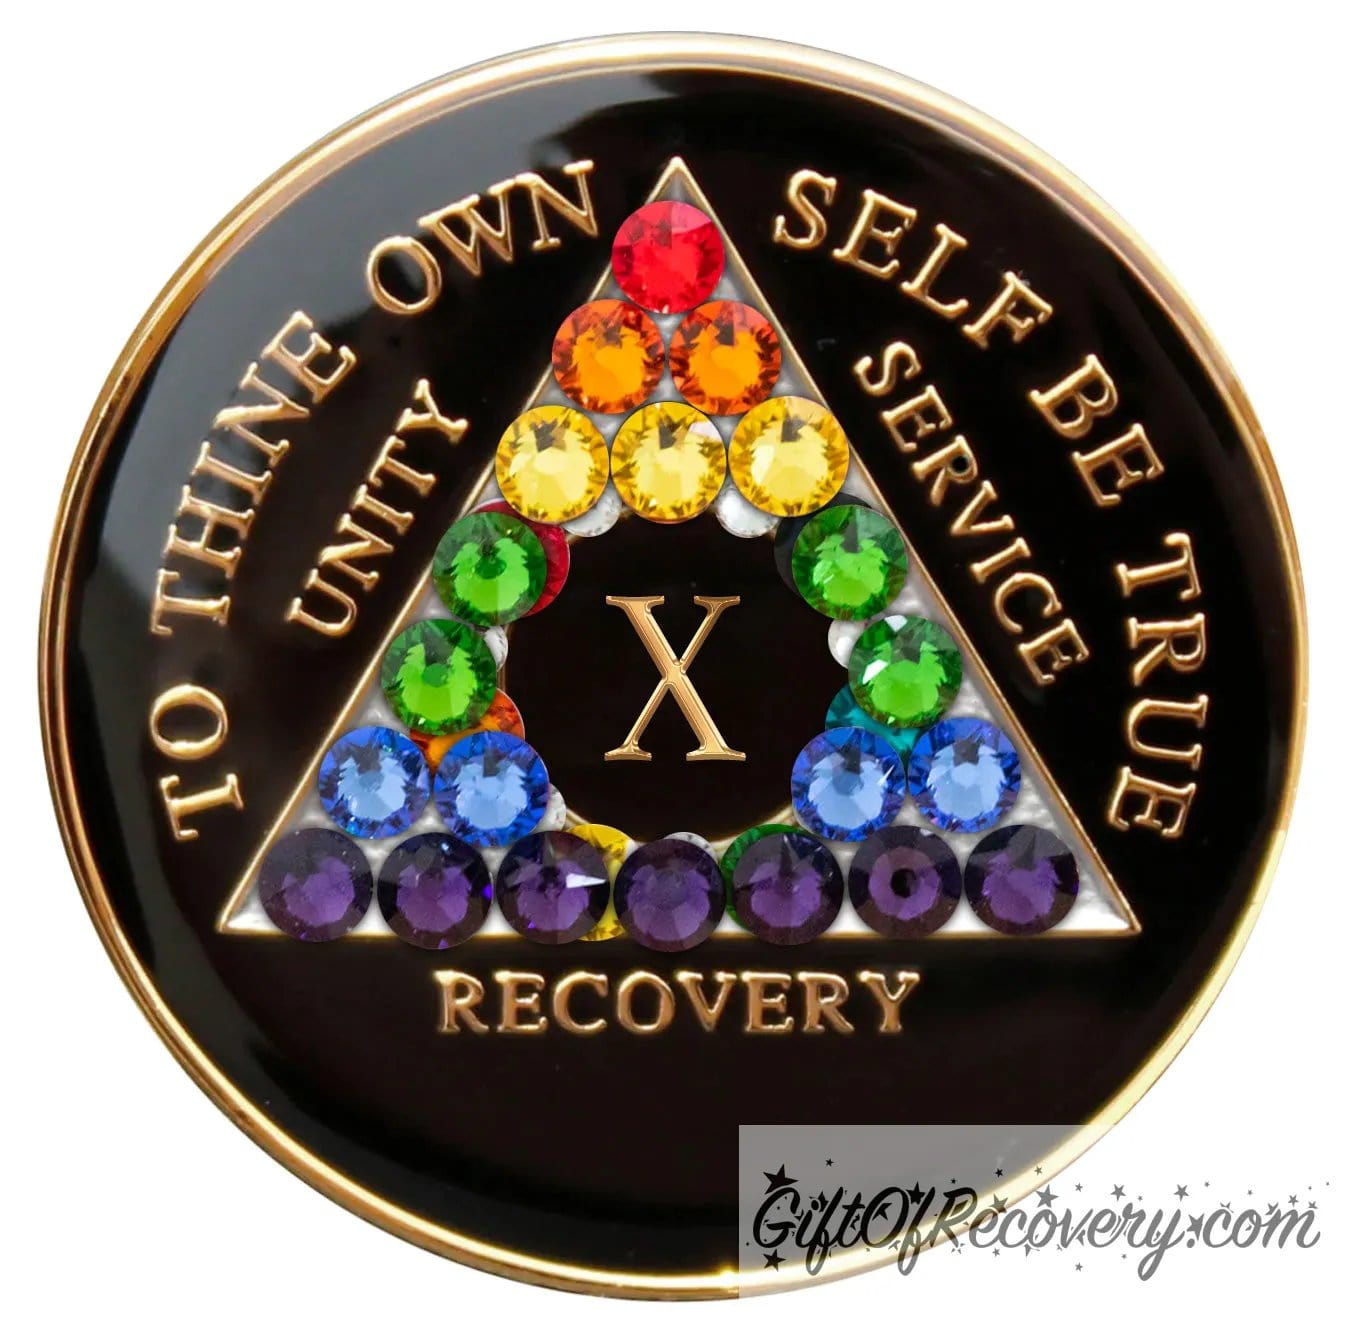 10 year AA medallion with 21 rainbow genuine crystals to represent the LBGTQIA+ community, show your pride with this Black onyx resin sealed recovery medallion that has 14k gold plated brass lettering of to thine own self be true, unity, service, recovery, and the roman numeral.